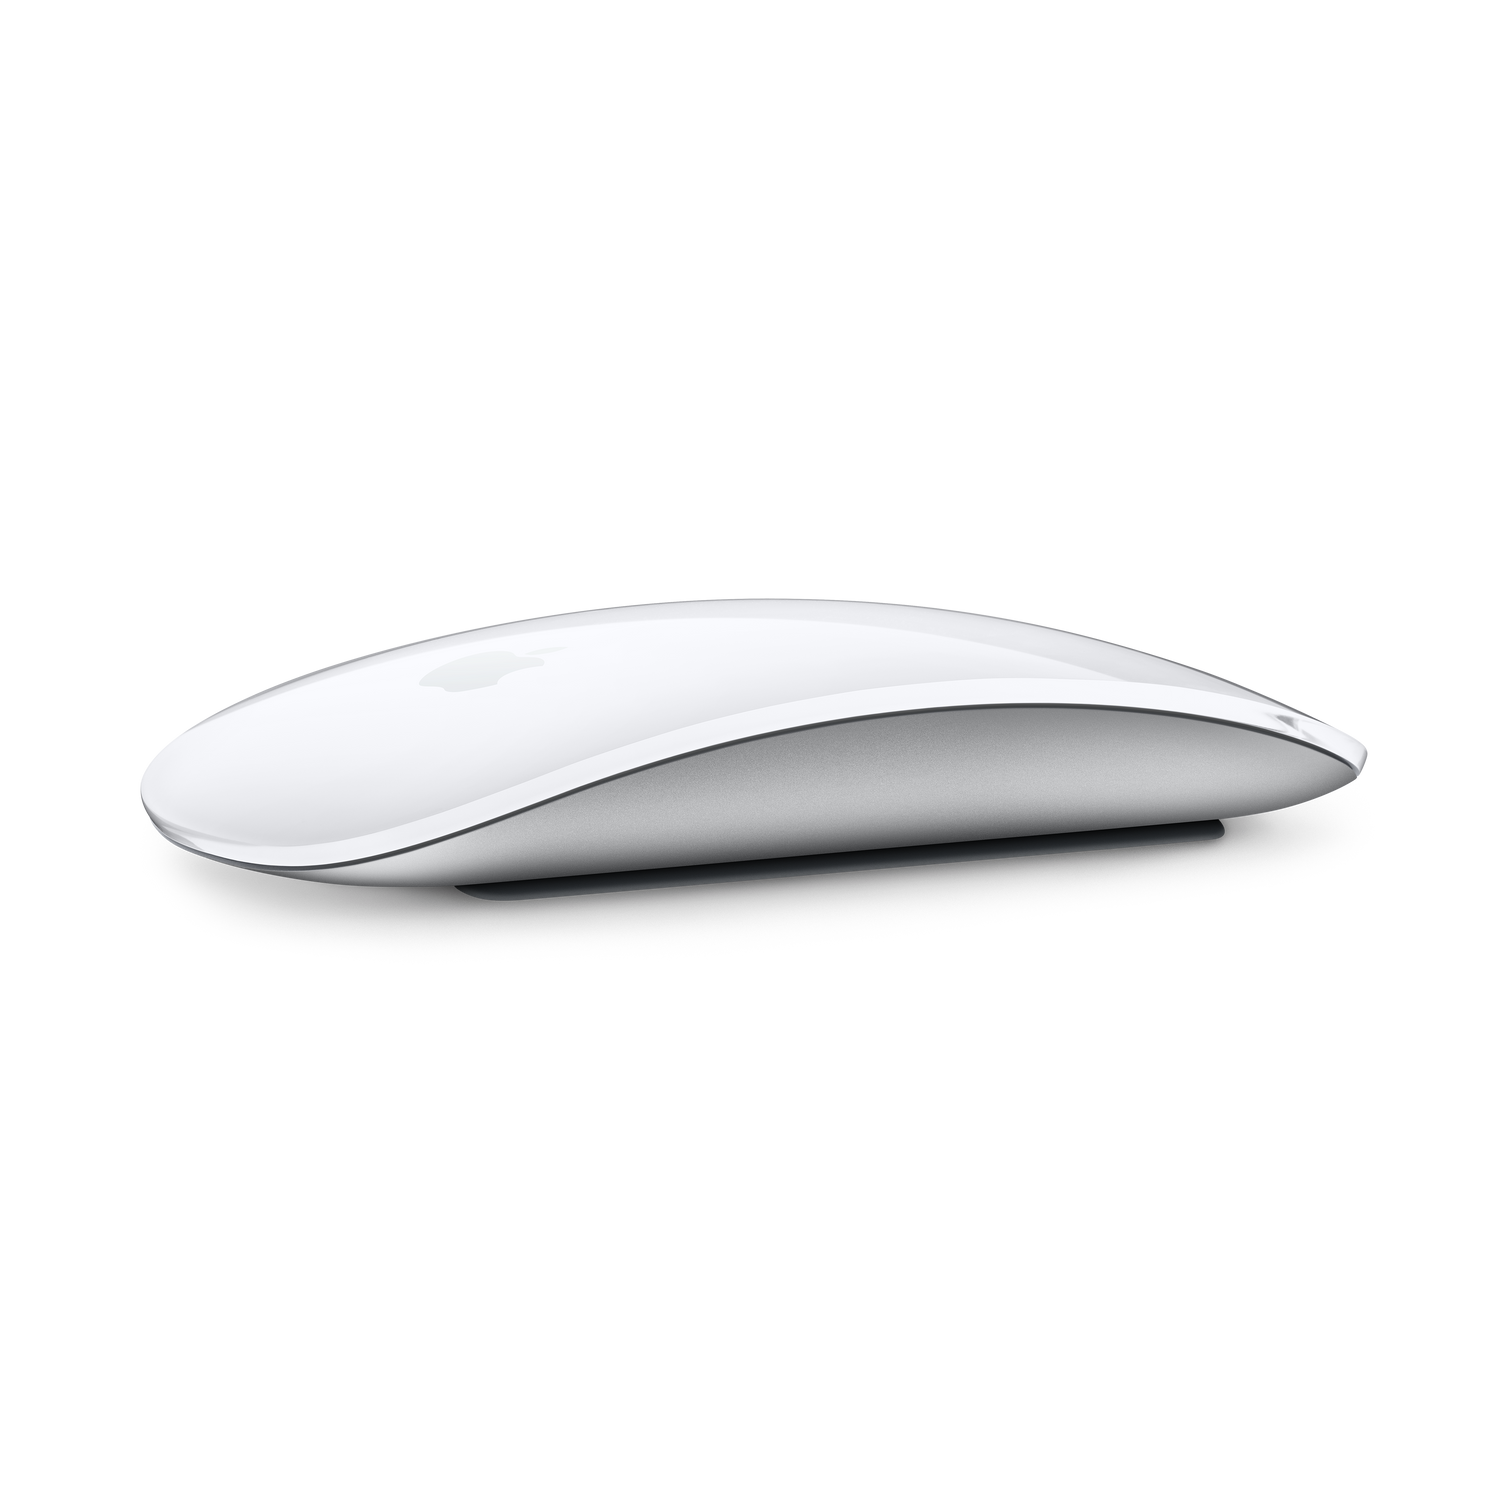 Magic Mouse - Rossellimac